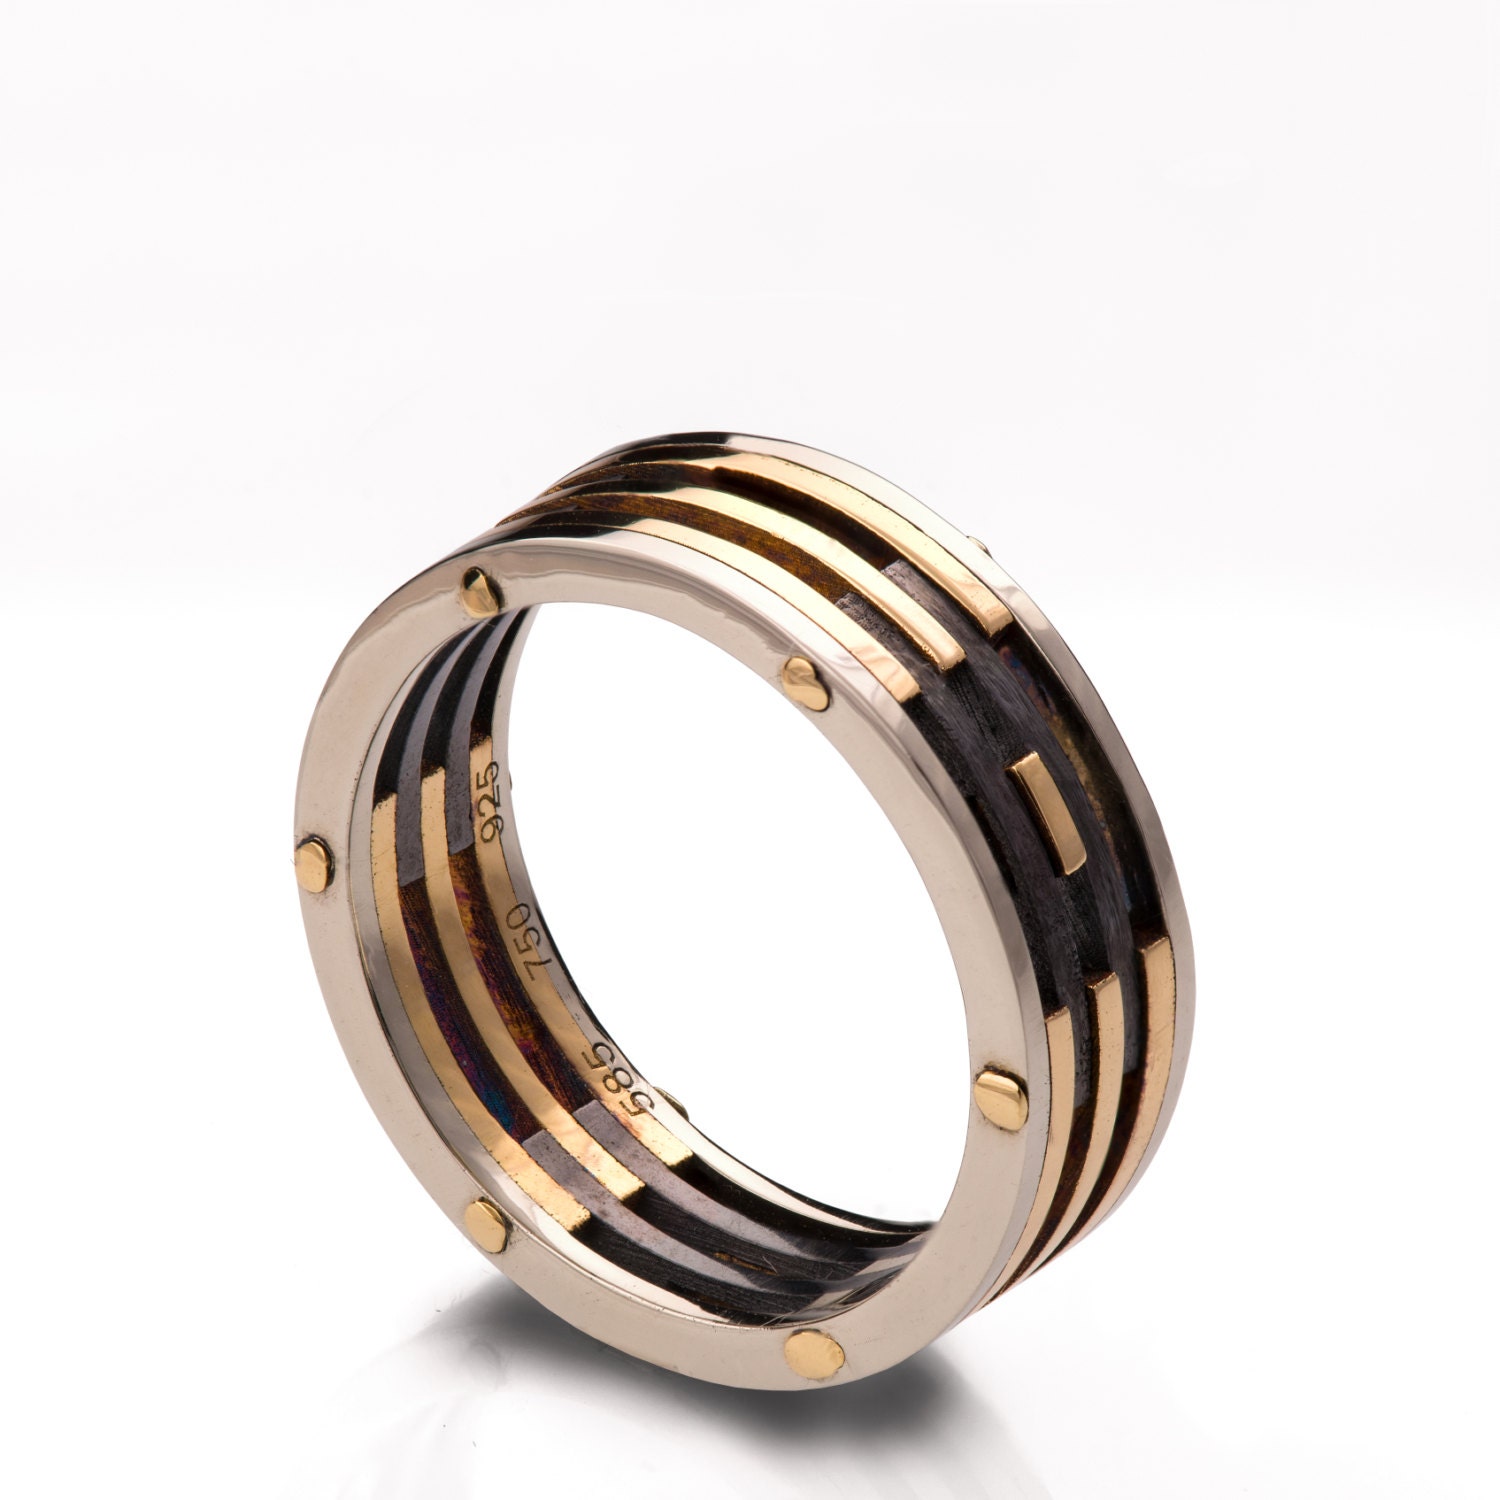  Gold  Wedding Band  Men s  18K Gold  and Oxidized Silver 